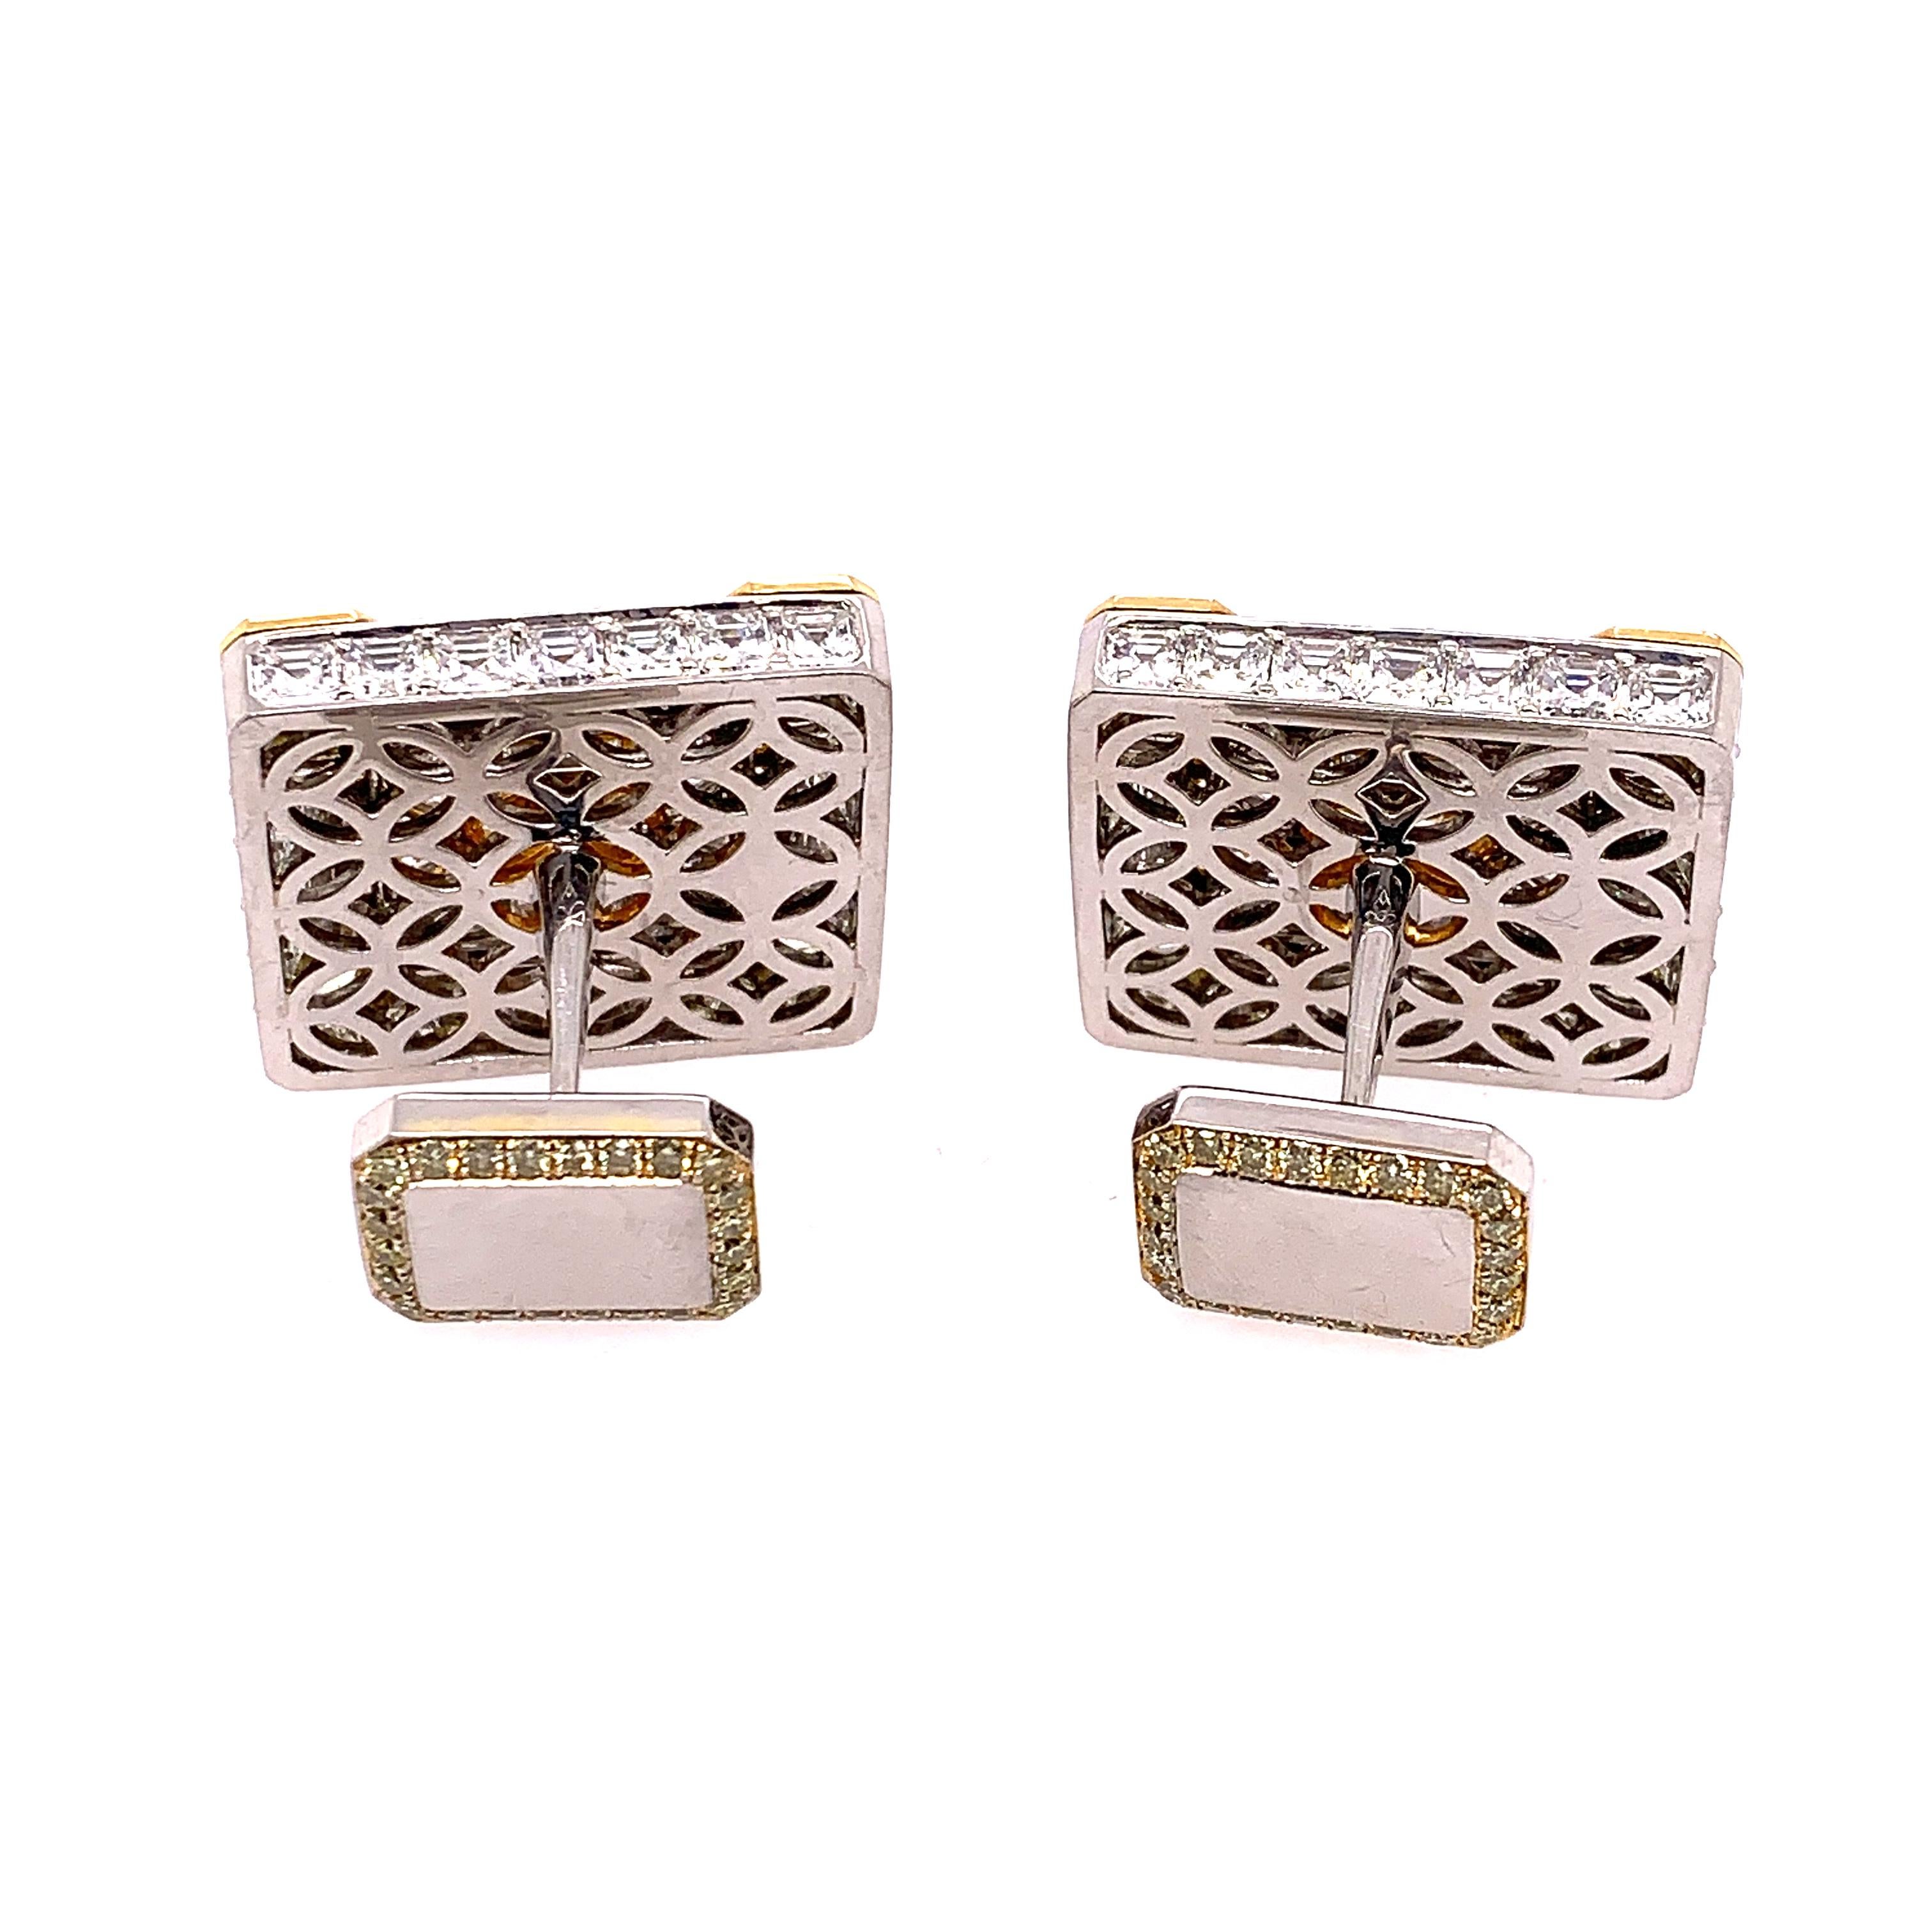 Yellow and White Diamond Cufflinks In Good Condition For Sale In New York, NY